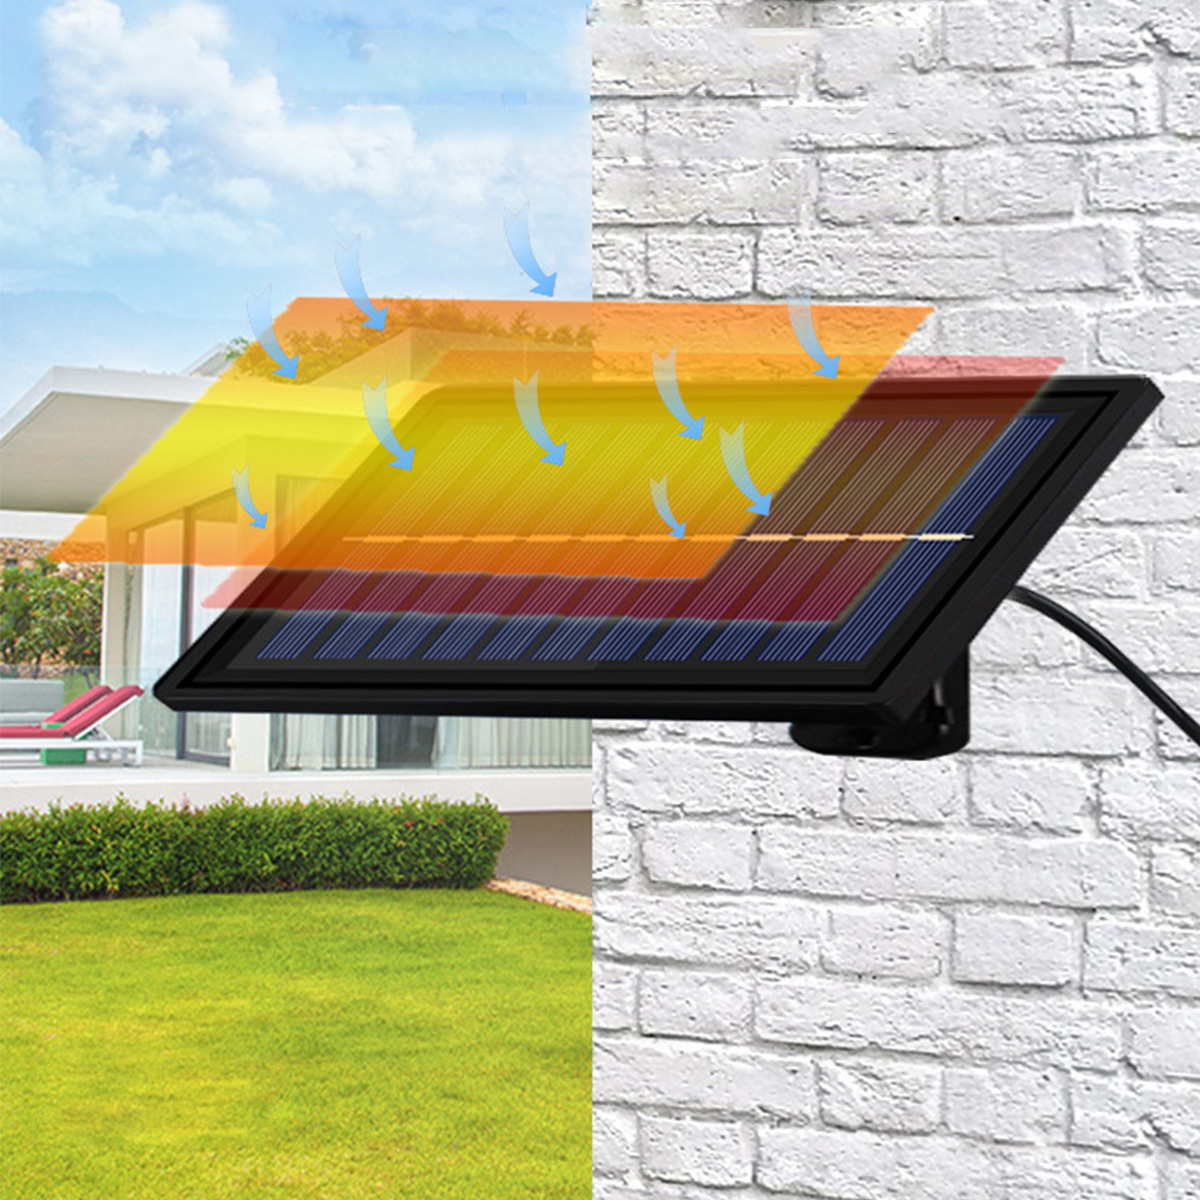 Split-Solar-Light-Remote-Led-Lights-With-Extension-Outdoor-Waterproof-Wall-Lamp-Sunlight-Powered-Lan-1935370-10